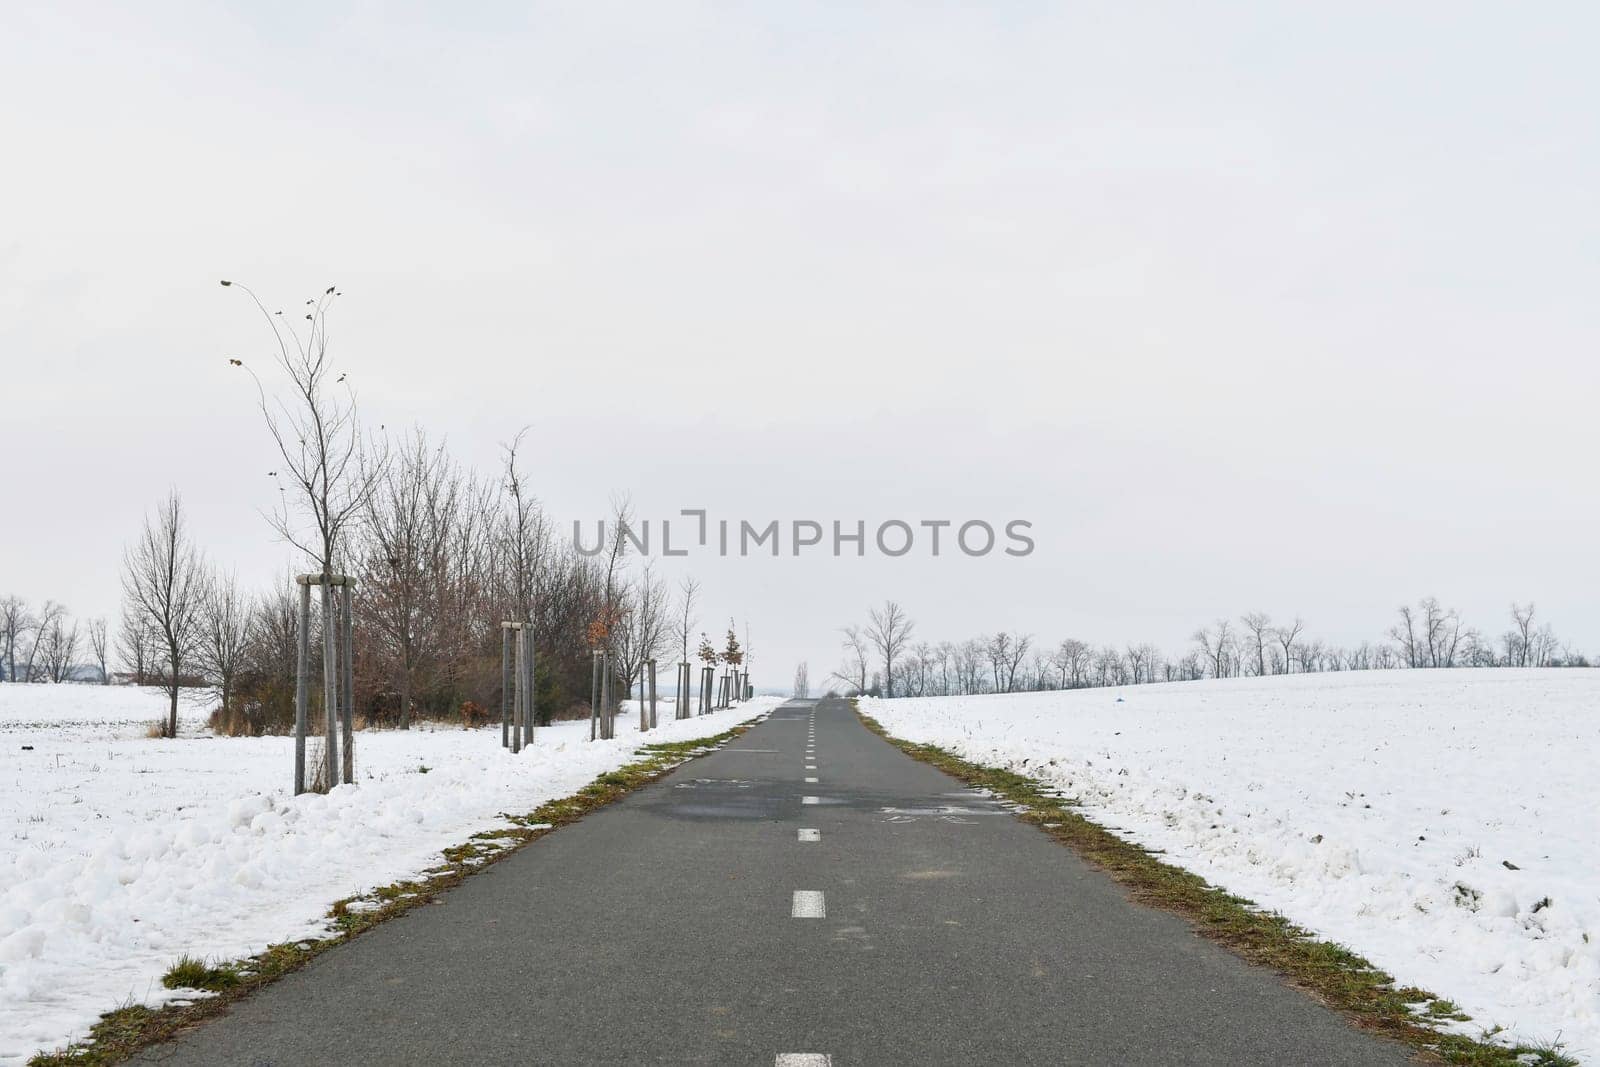 Road raked by snow plough in winter. Roads cleared by plough in winter. Concept of winter and winter road care by roman_nerud